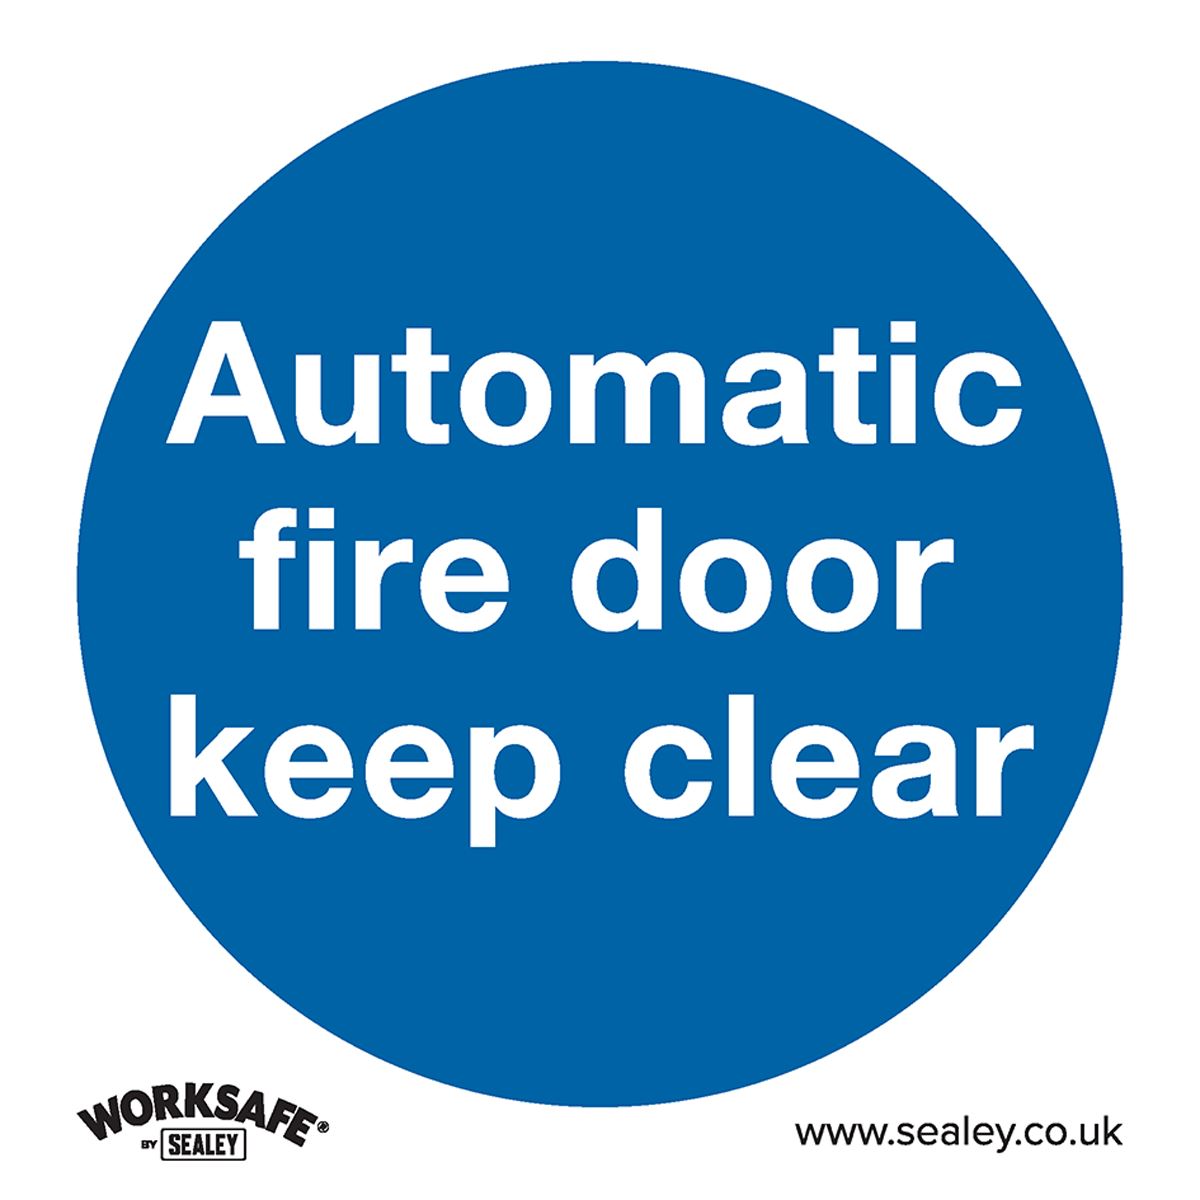 Worksafe by Sealey Mandatory Safety Sign - Automatic Fire Door Keep Clear - Rigid Plastic - Pack of 10